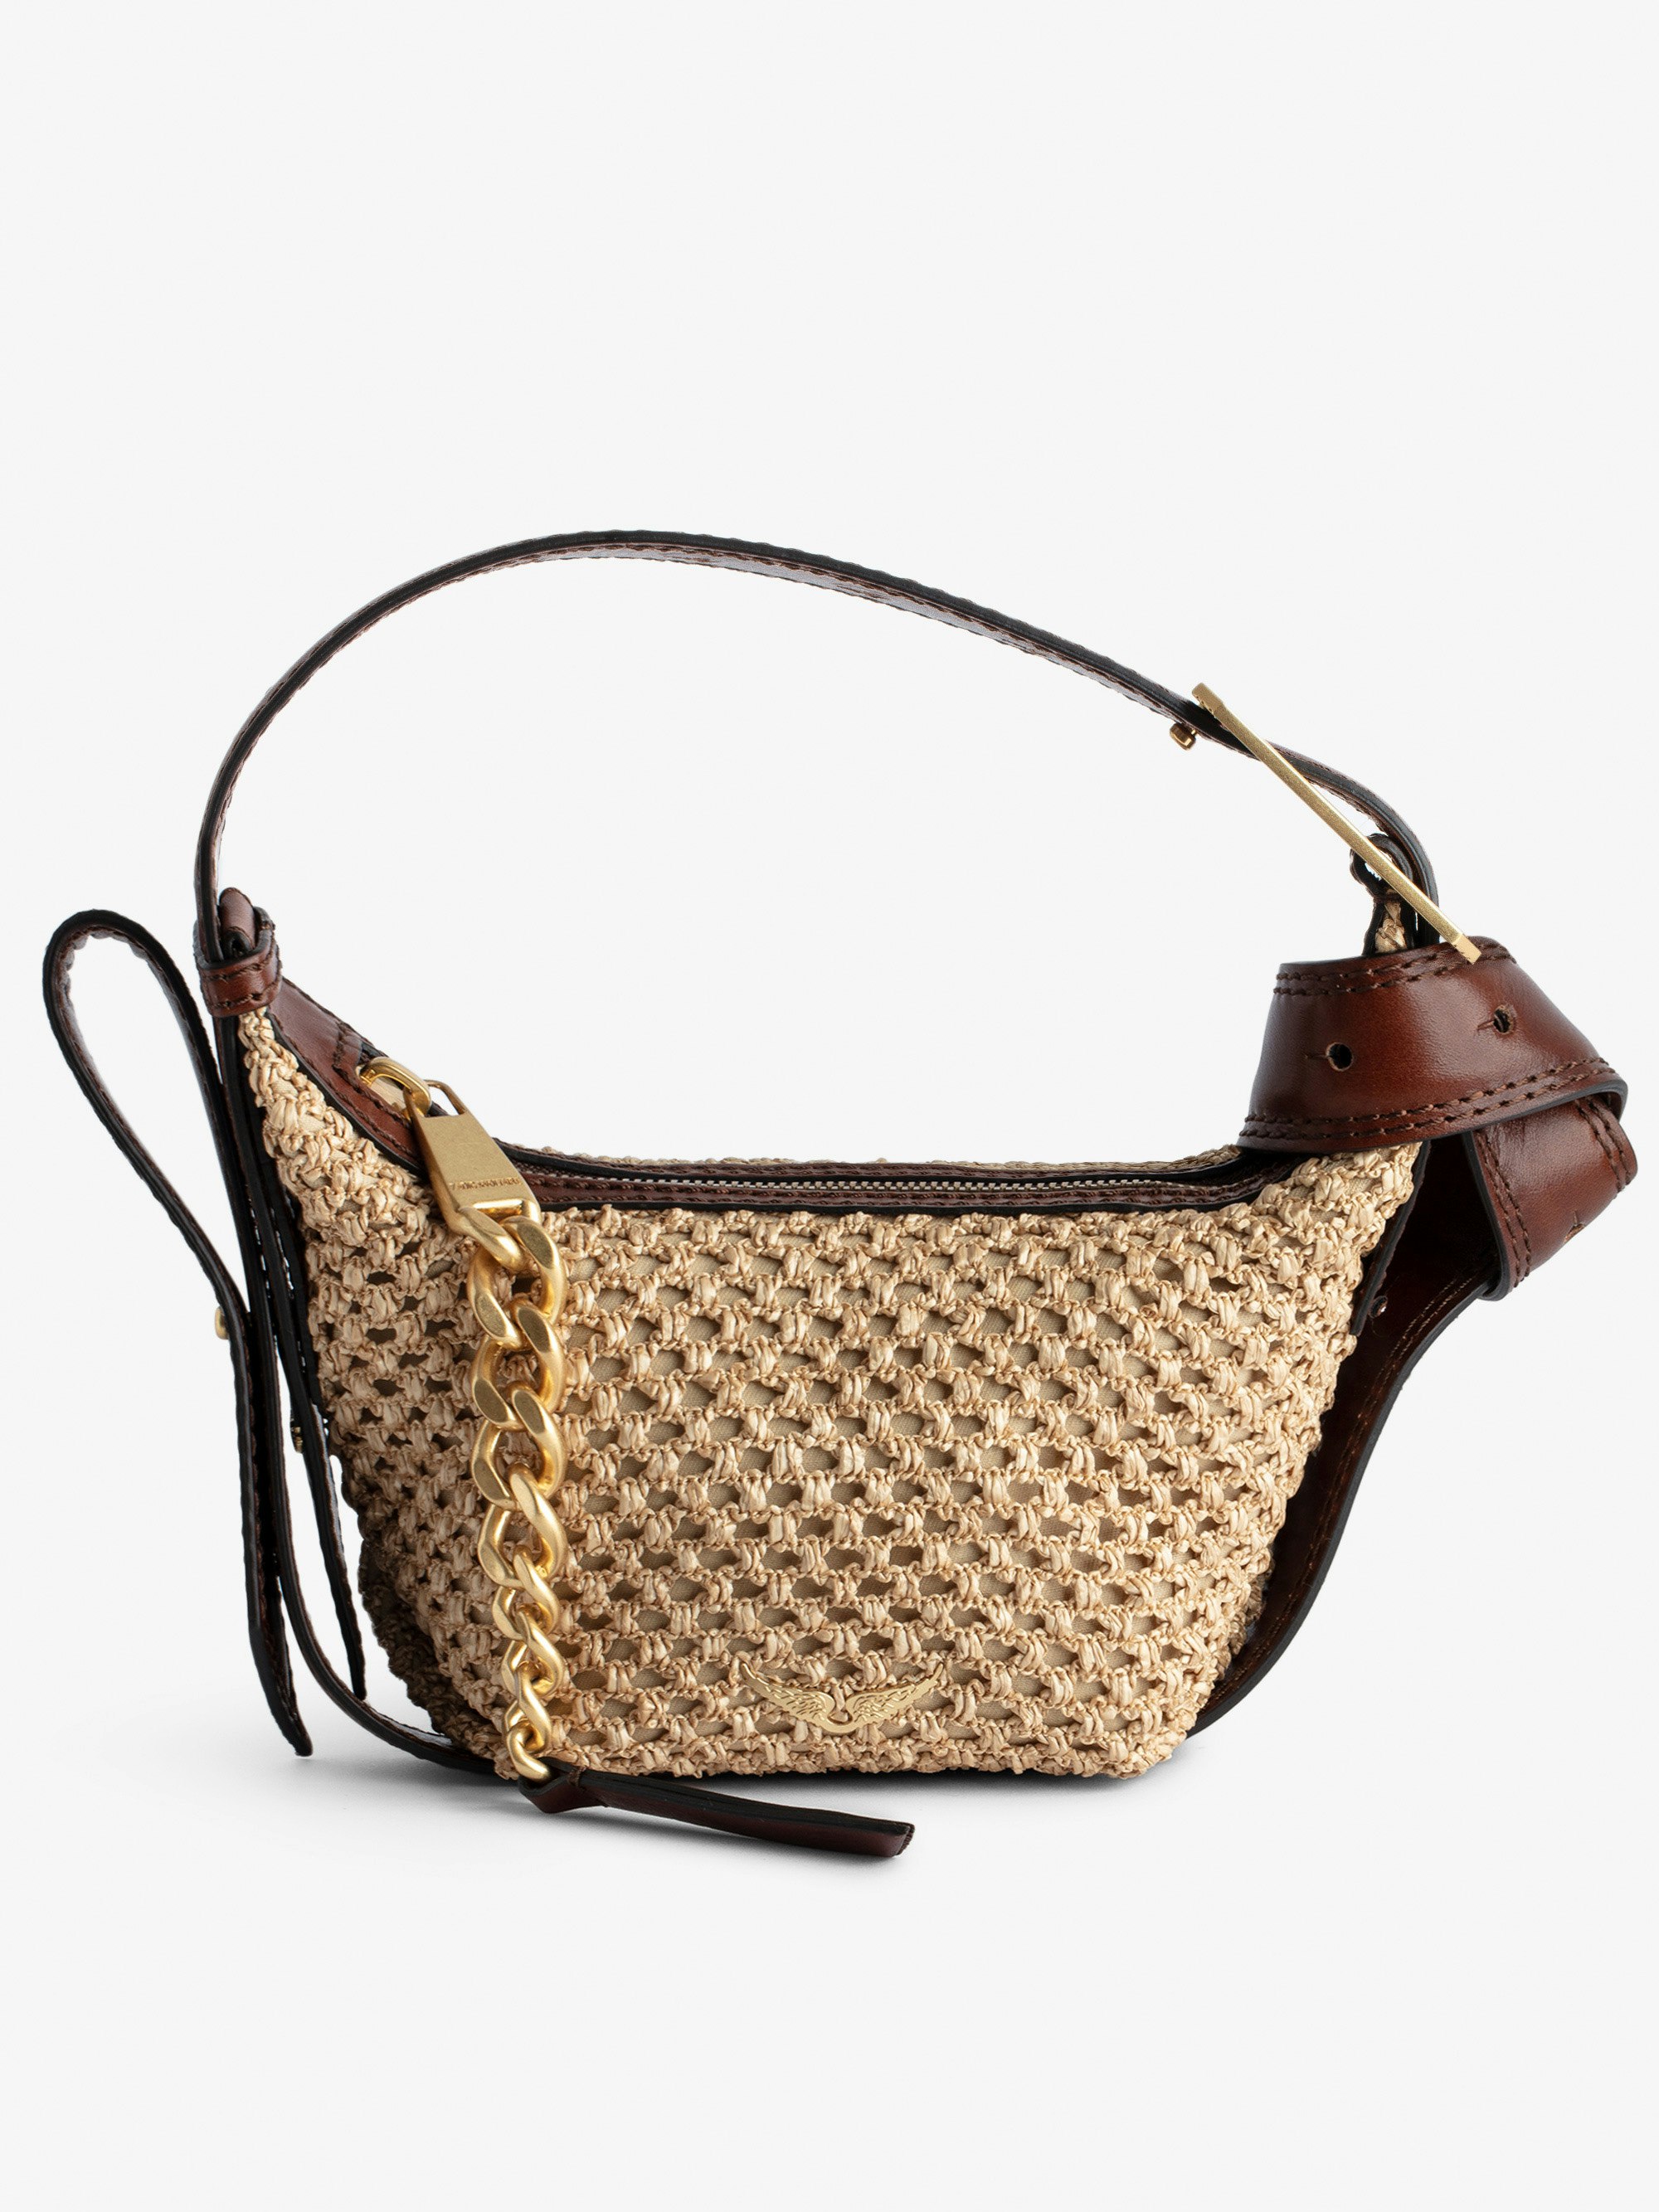 Le Cecilia XS Bag - Small beige basket-style bag with leather shoulder strap and metallic C buckle.